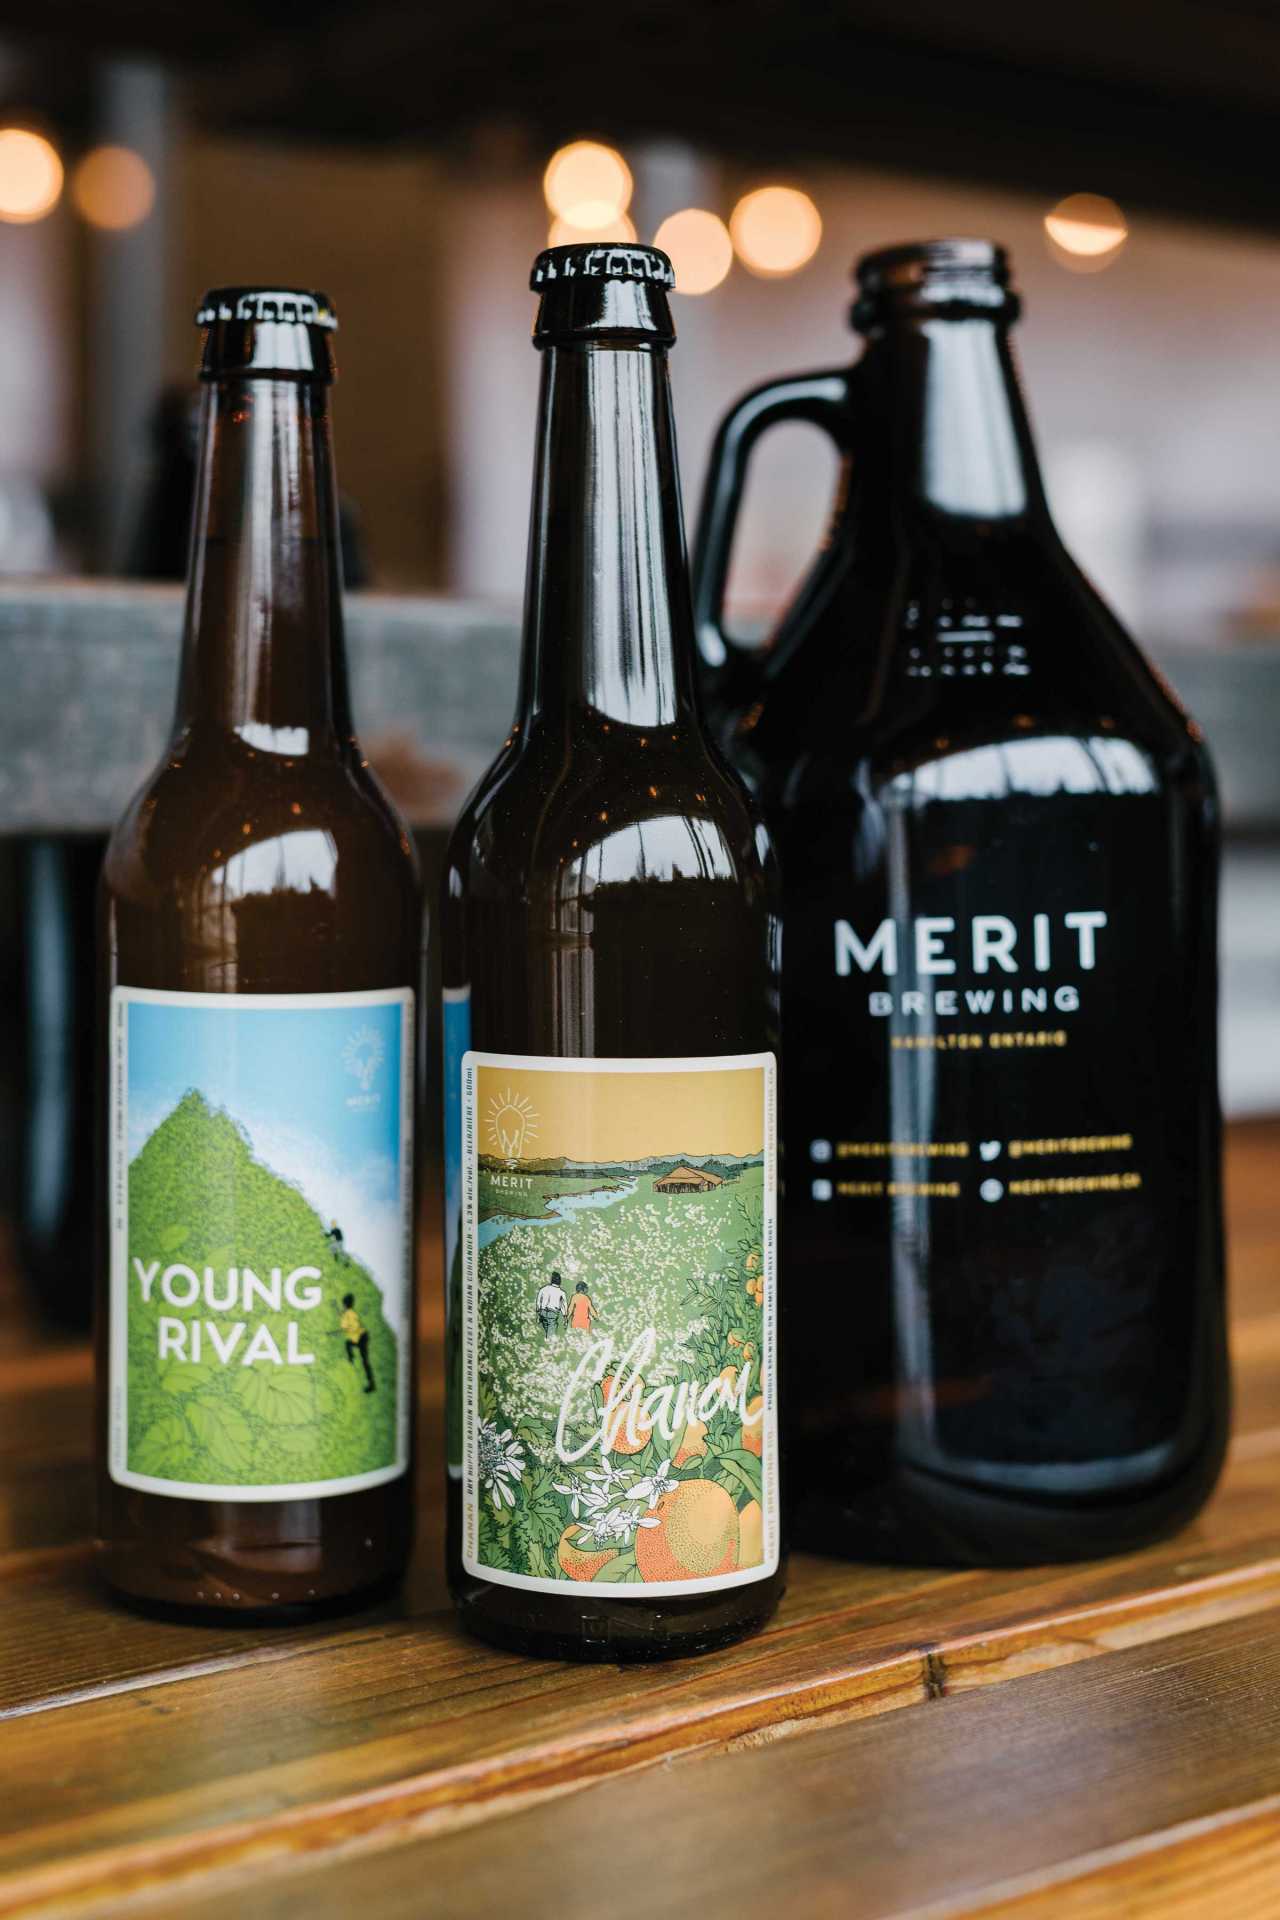 Diversity in Beer: A selection of beers from Merit Brewing